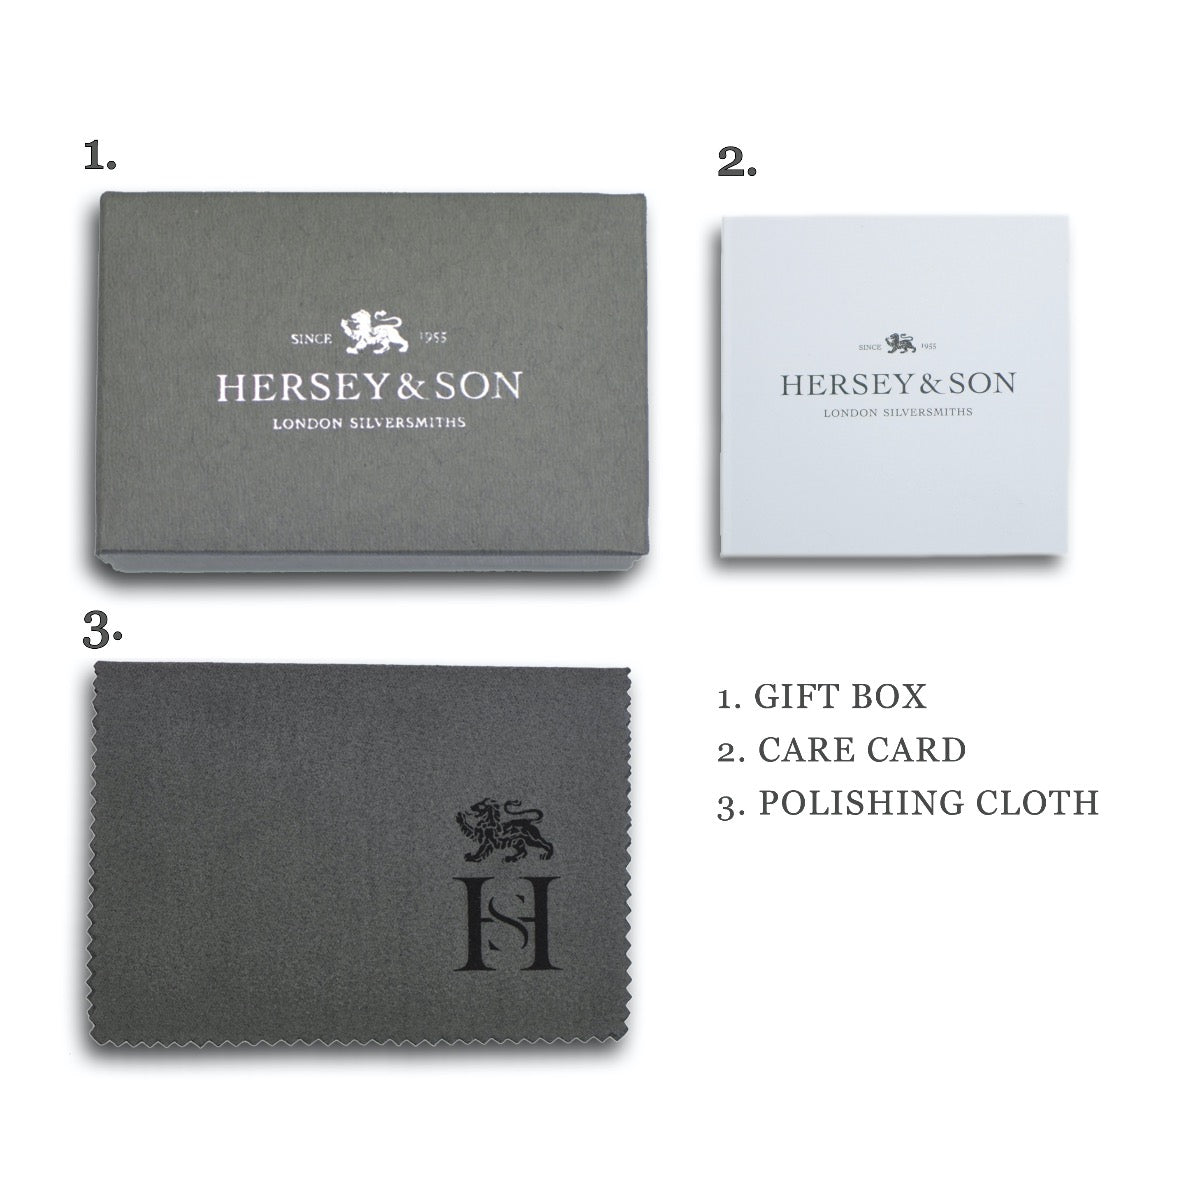 Hersey & Son Packaging 